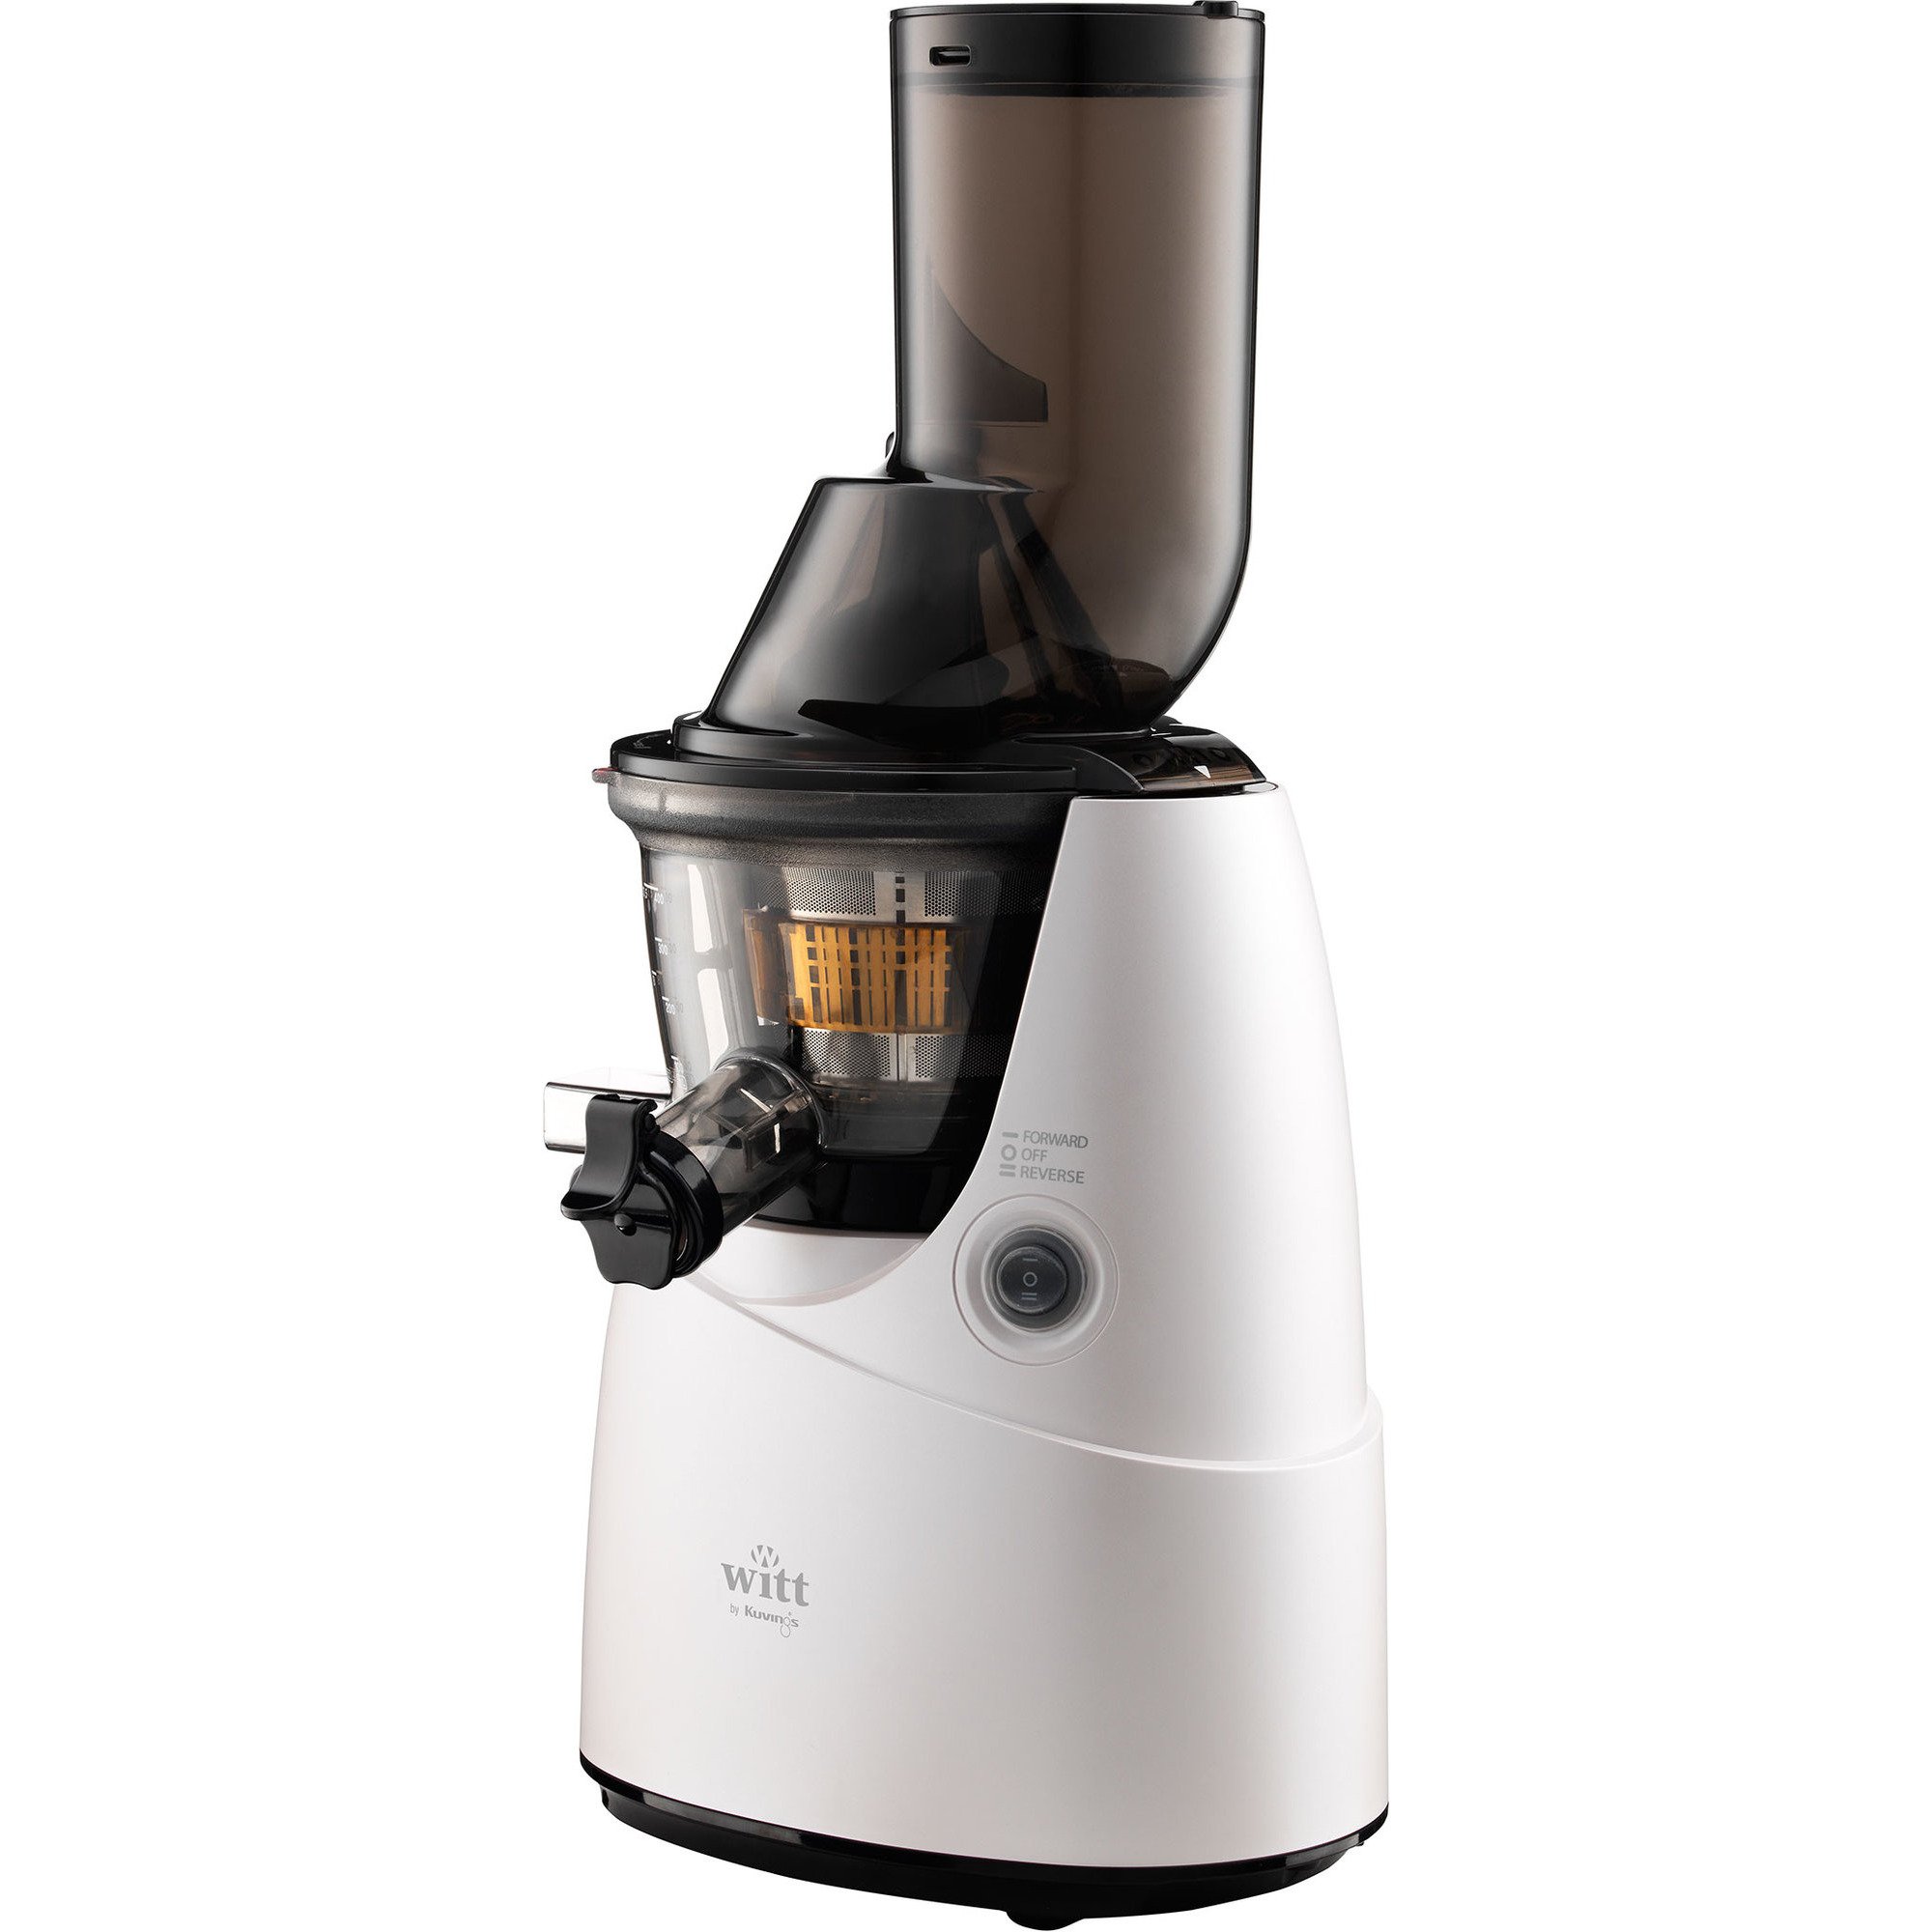 Witt by Kuvings B6640 Slow Juicer